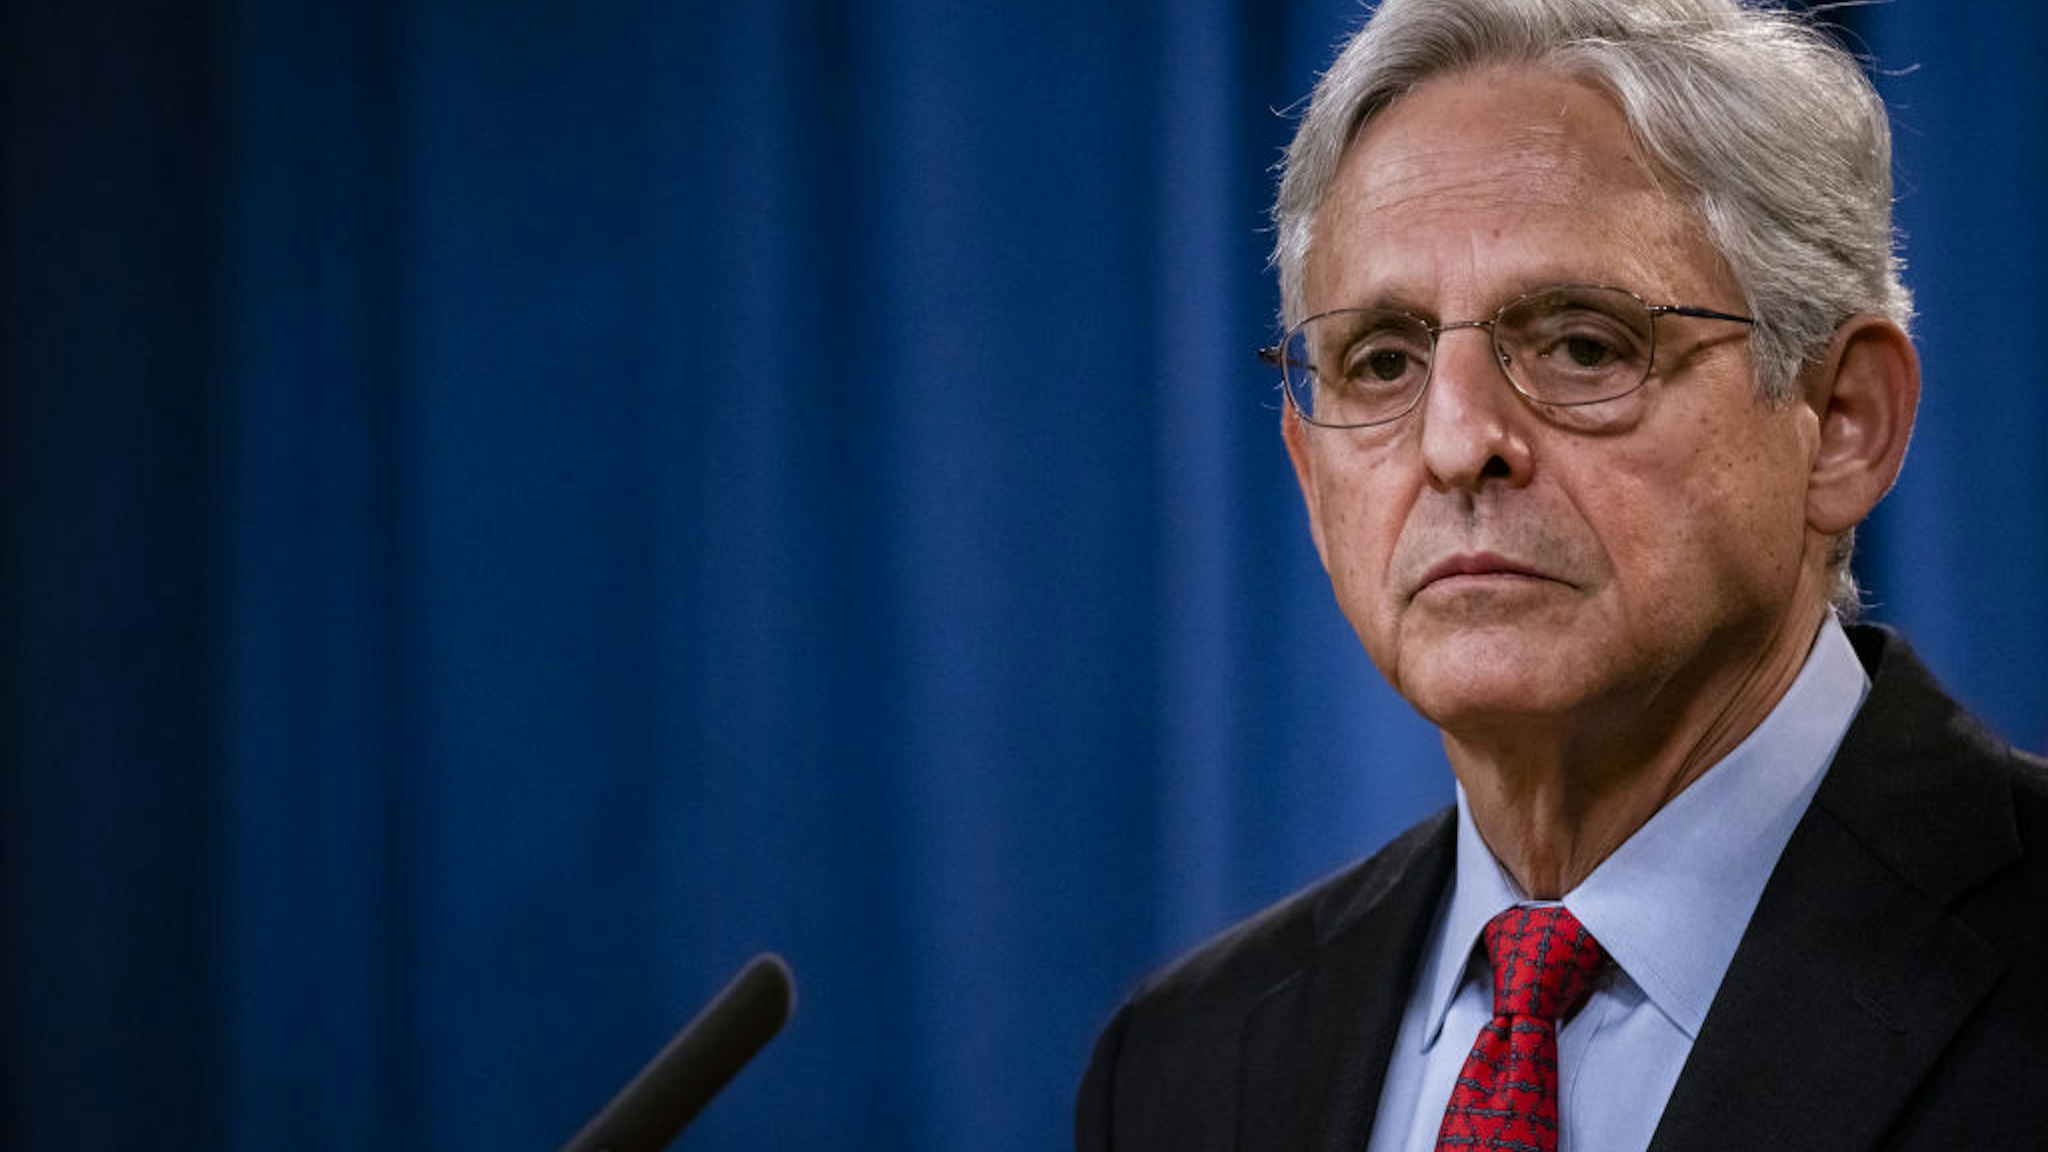 Merrick Garland, U.S. attorney general, during a news conference at the Department of Justice in Washington, D.C., U.S., on Thursday, Sept. 9, 2021.